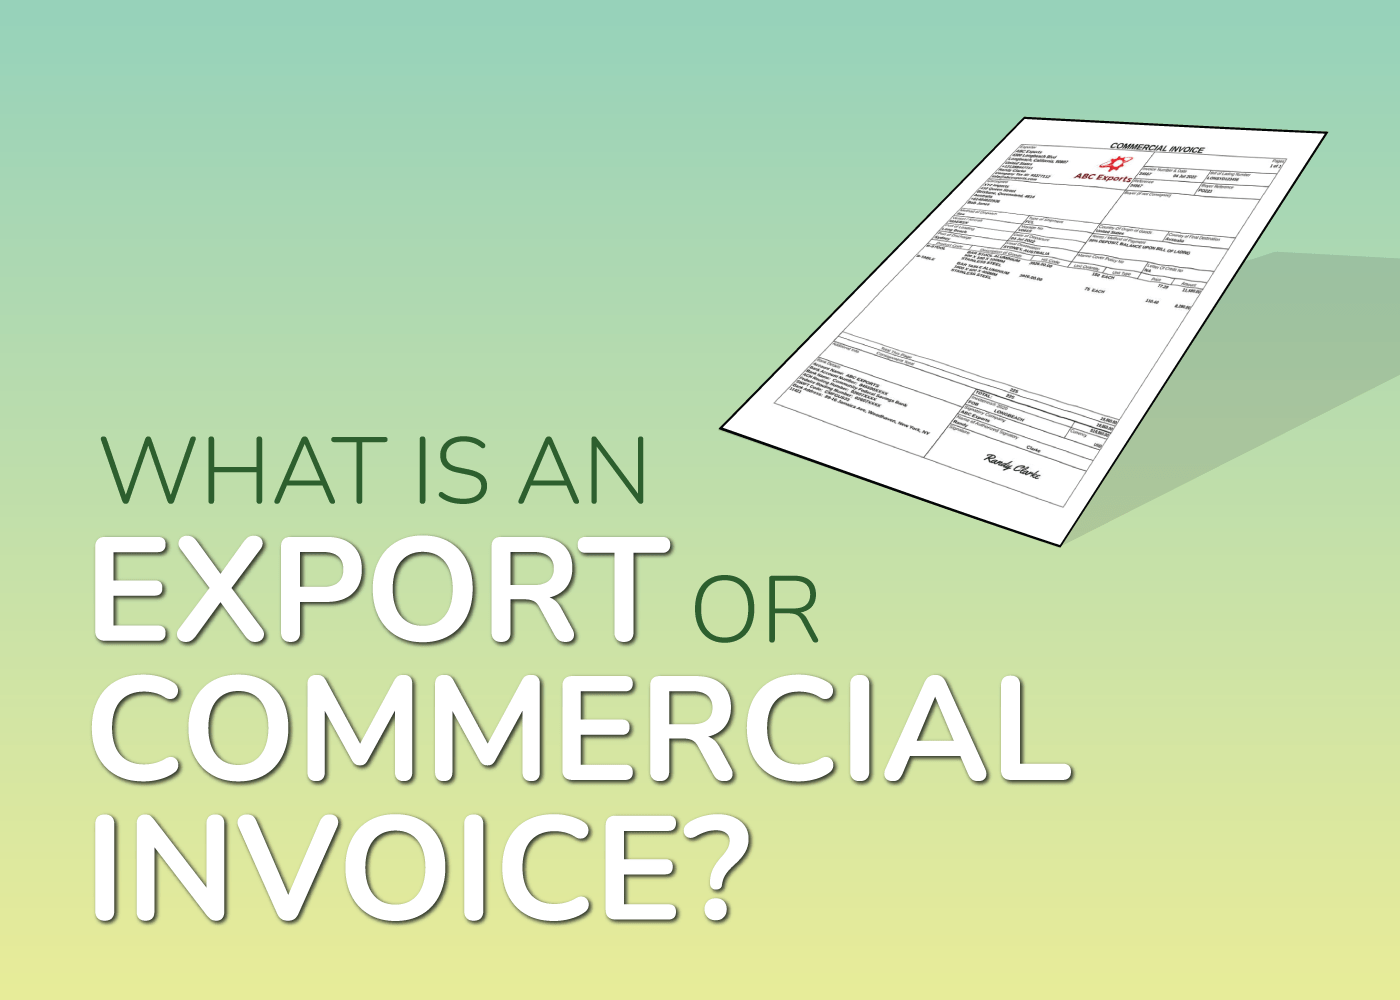 How to create a Export or commercial invoice in EdgeCTP